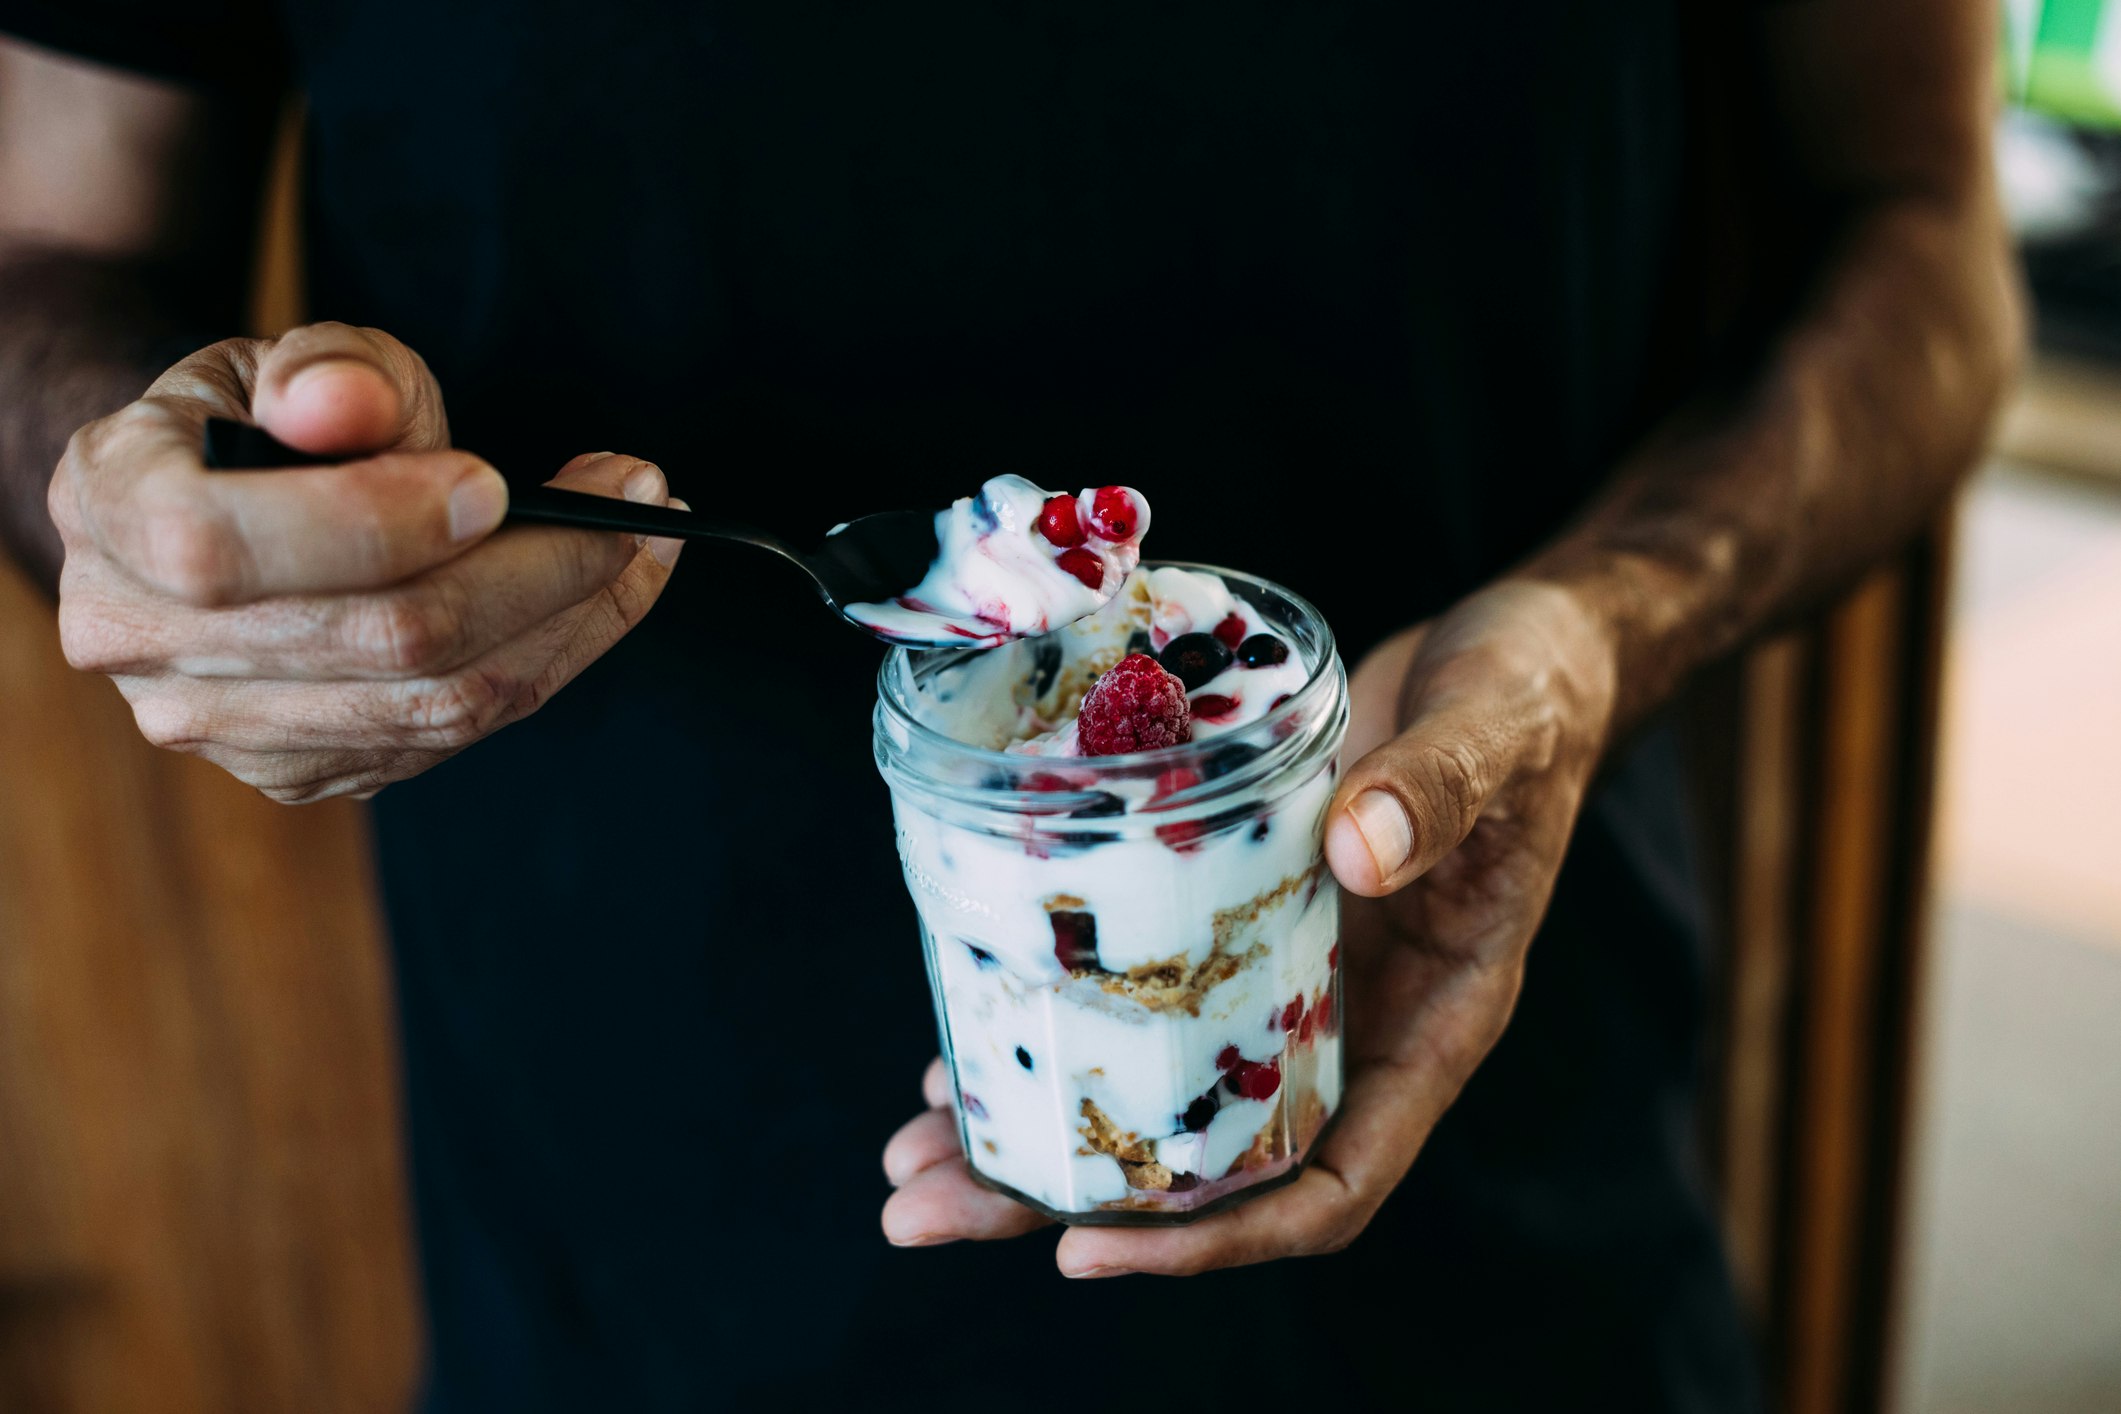 A man holding a jar of yogurt with berries